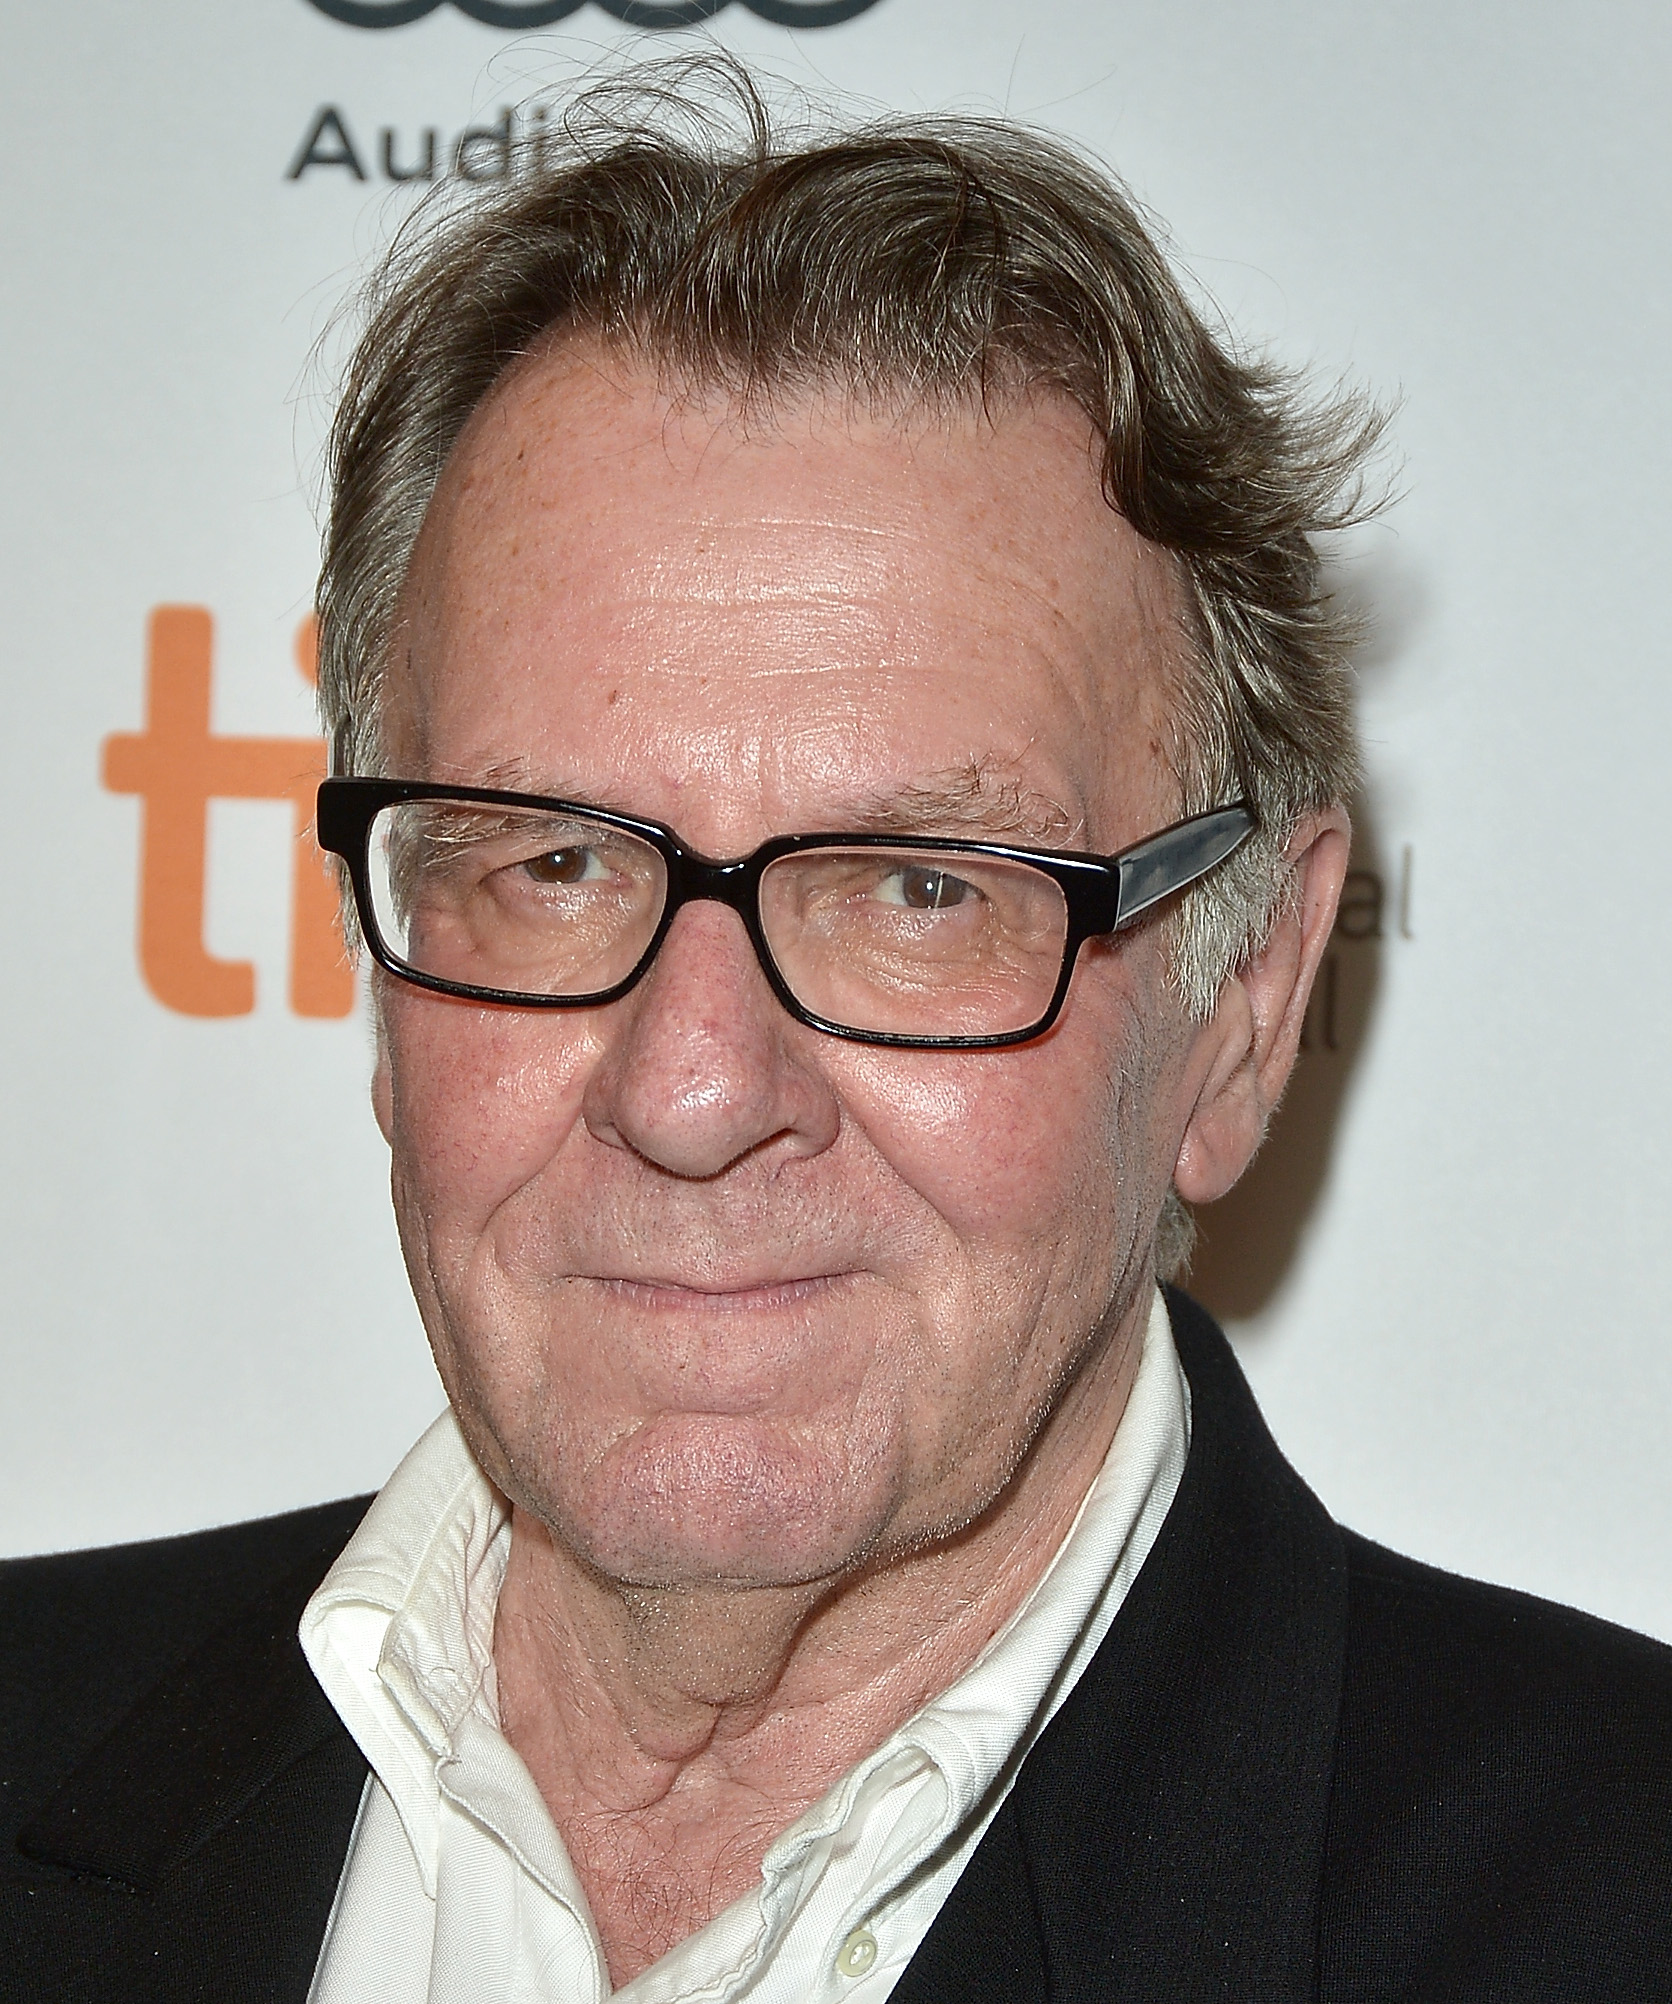 How tall is Tom Wilkinson?